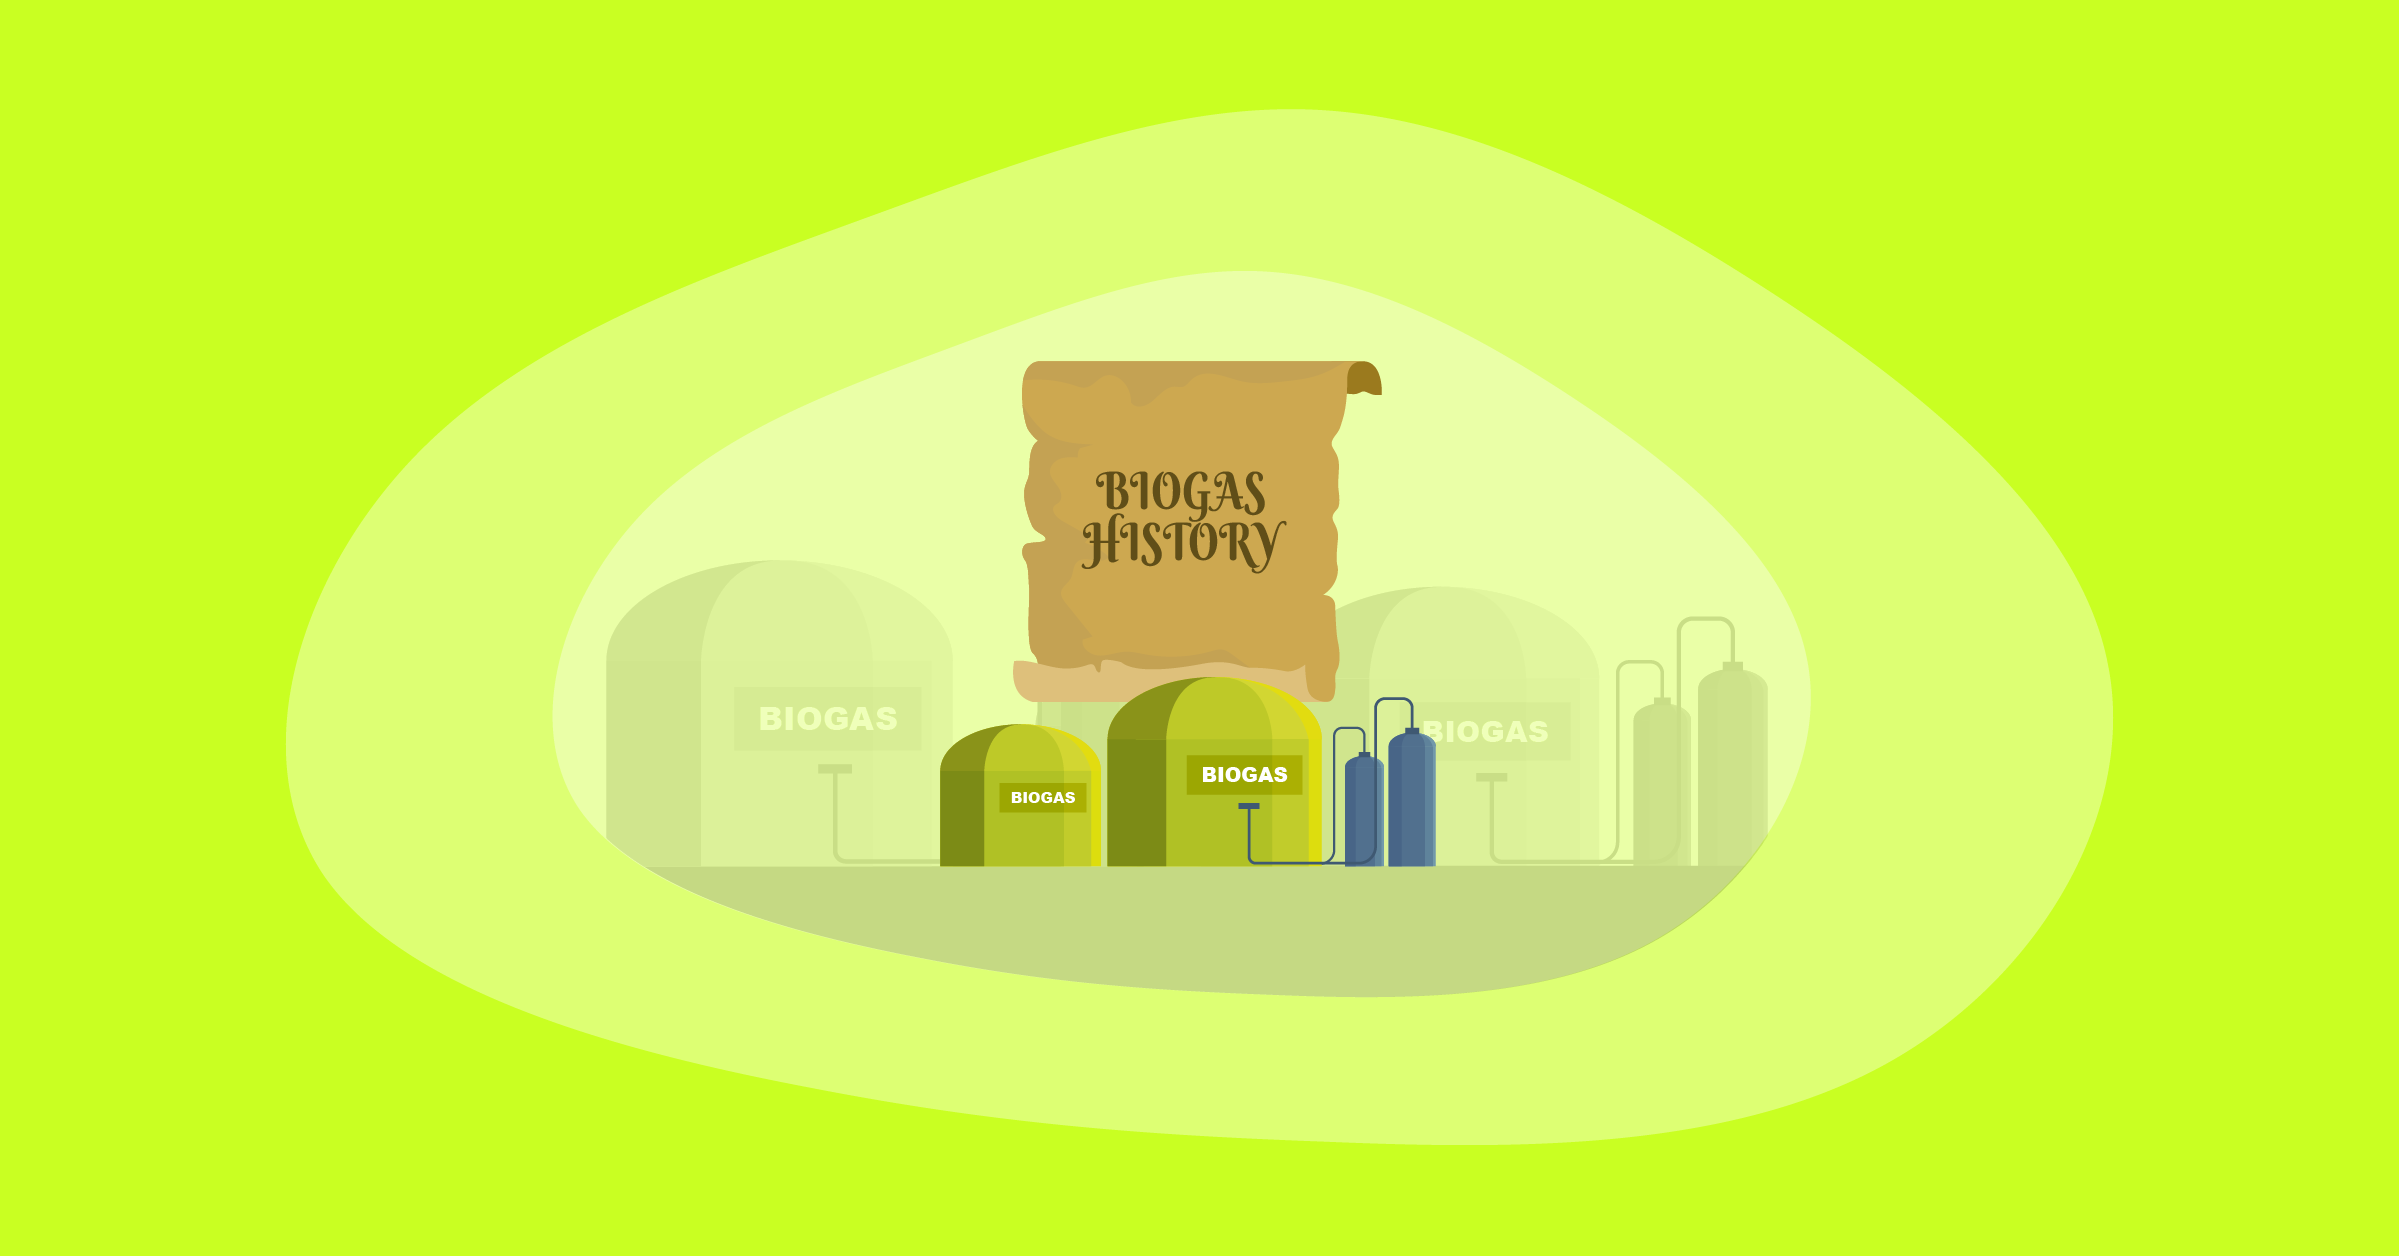 Illustration of Biogas and its history